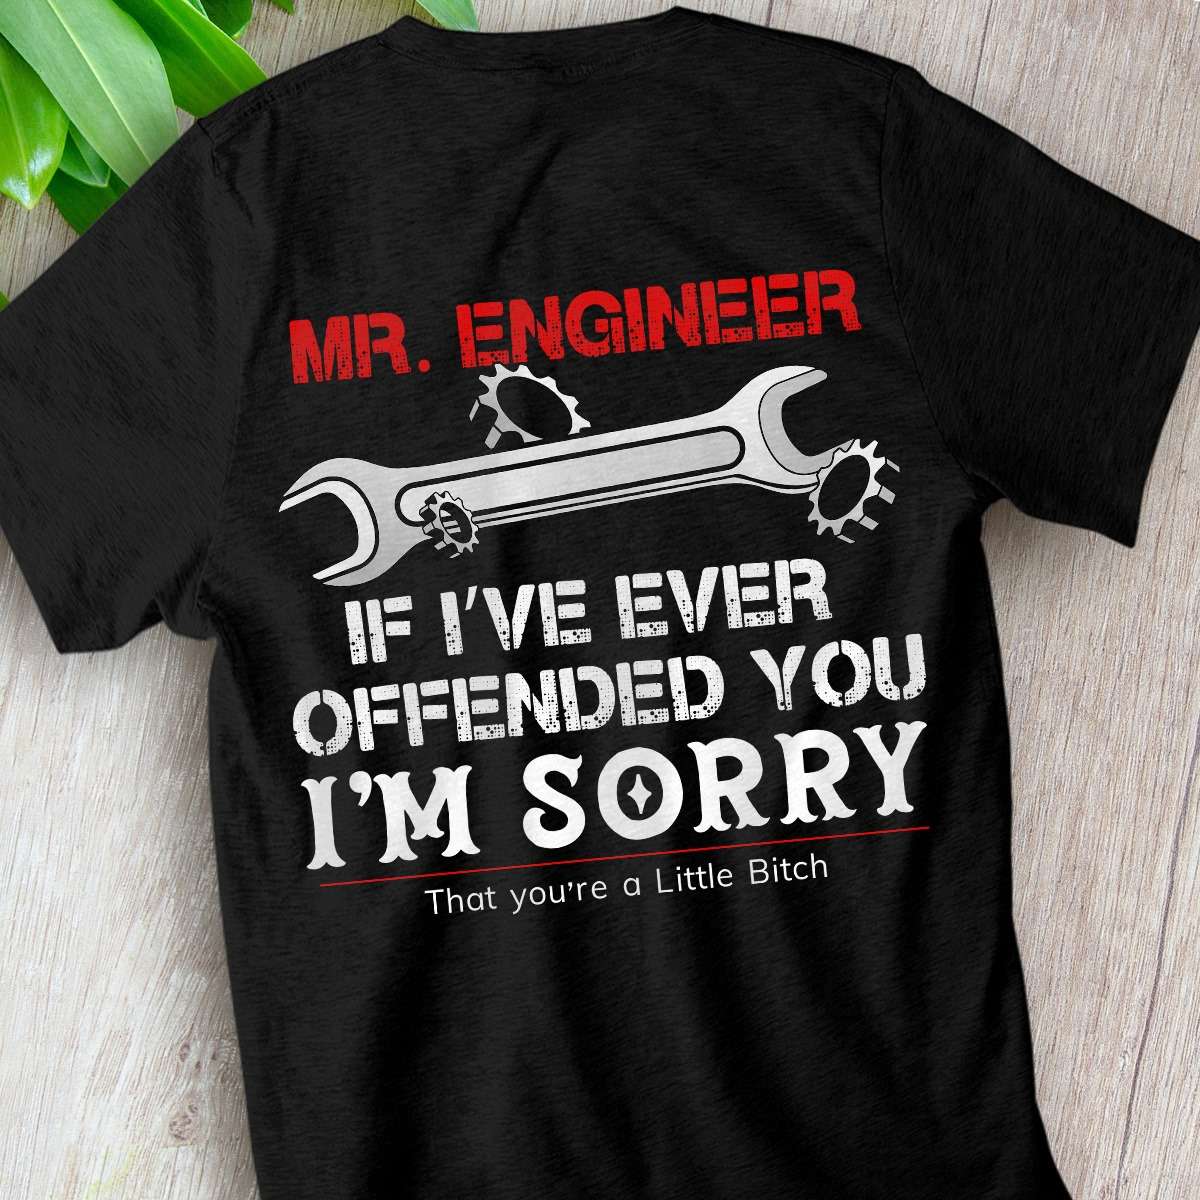 Mr. Engineer If I've ever offended you I'm sorry that you're a little bitch - Engineer fix everything